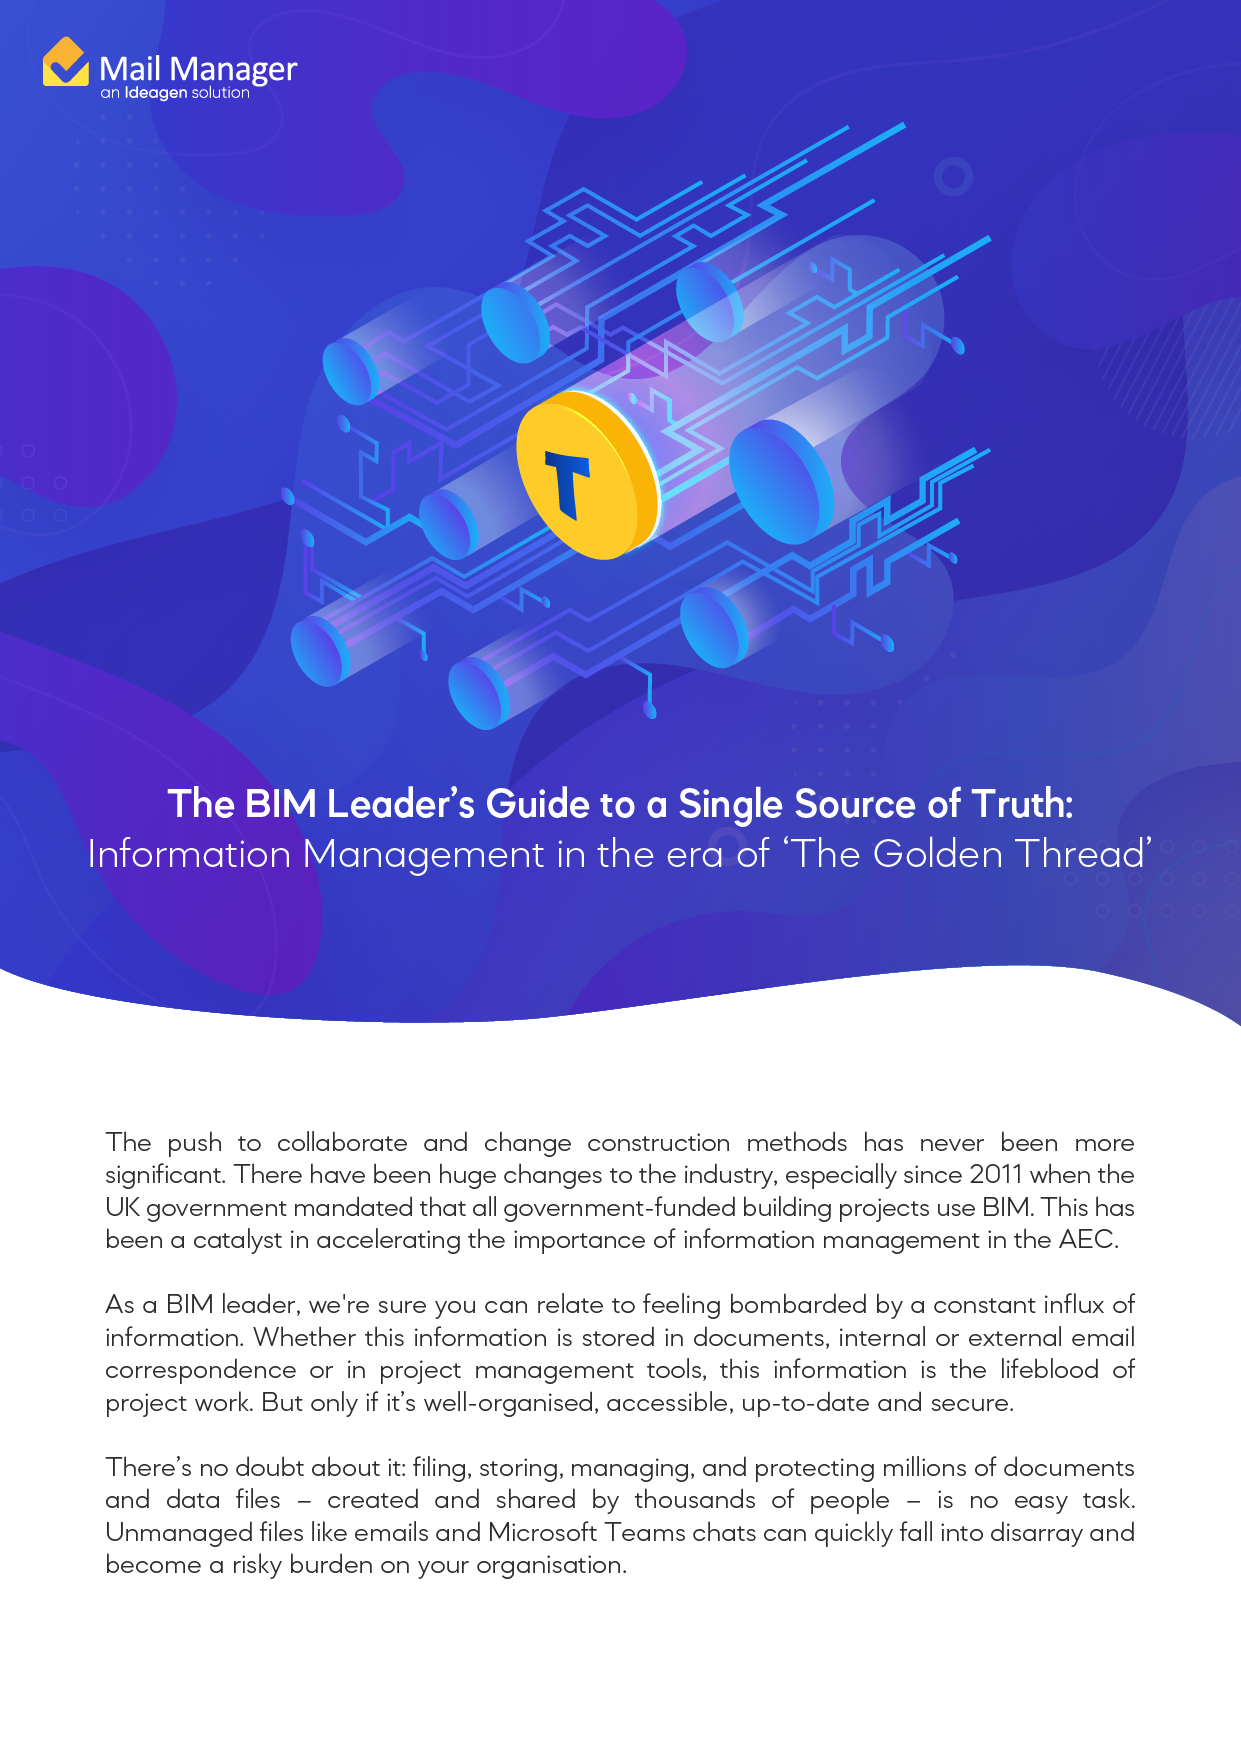 The BIM Leader’s Guide to a Single Source of Truth- Information Management in the era of ‘The Golden Thread’-01